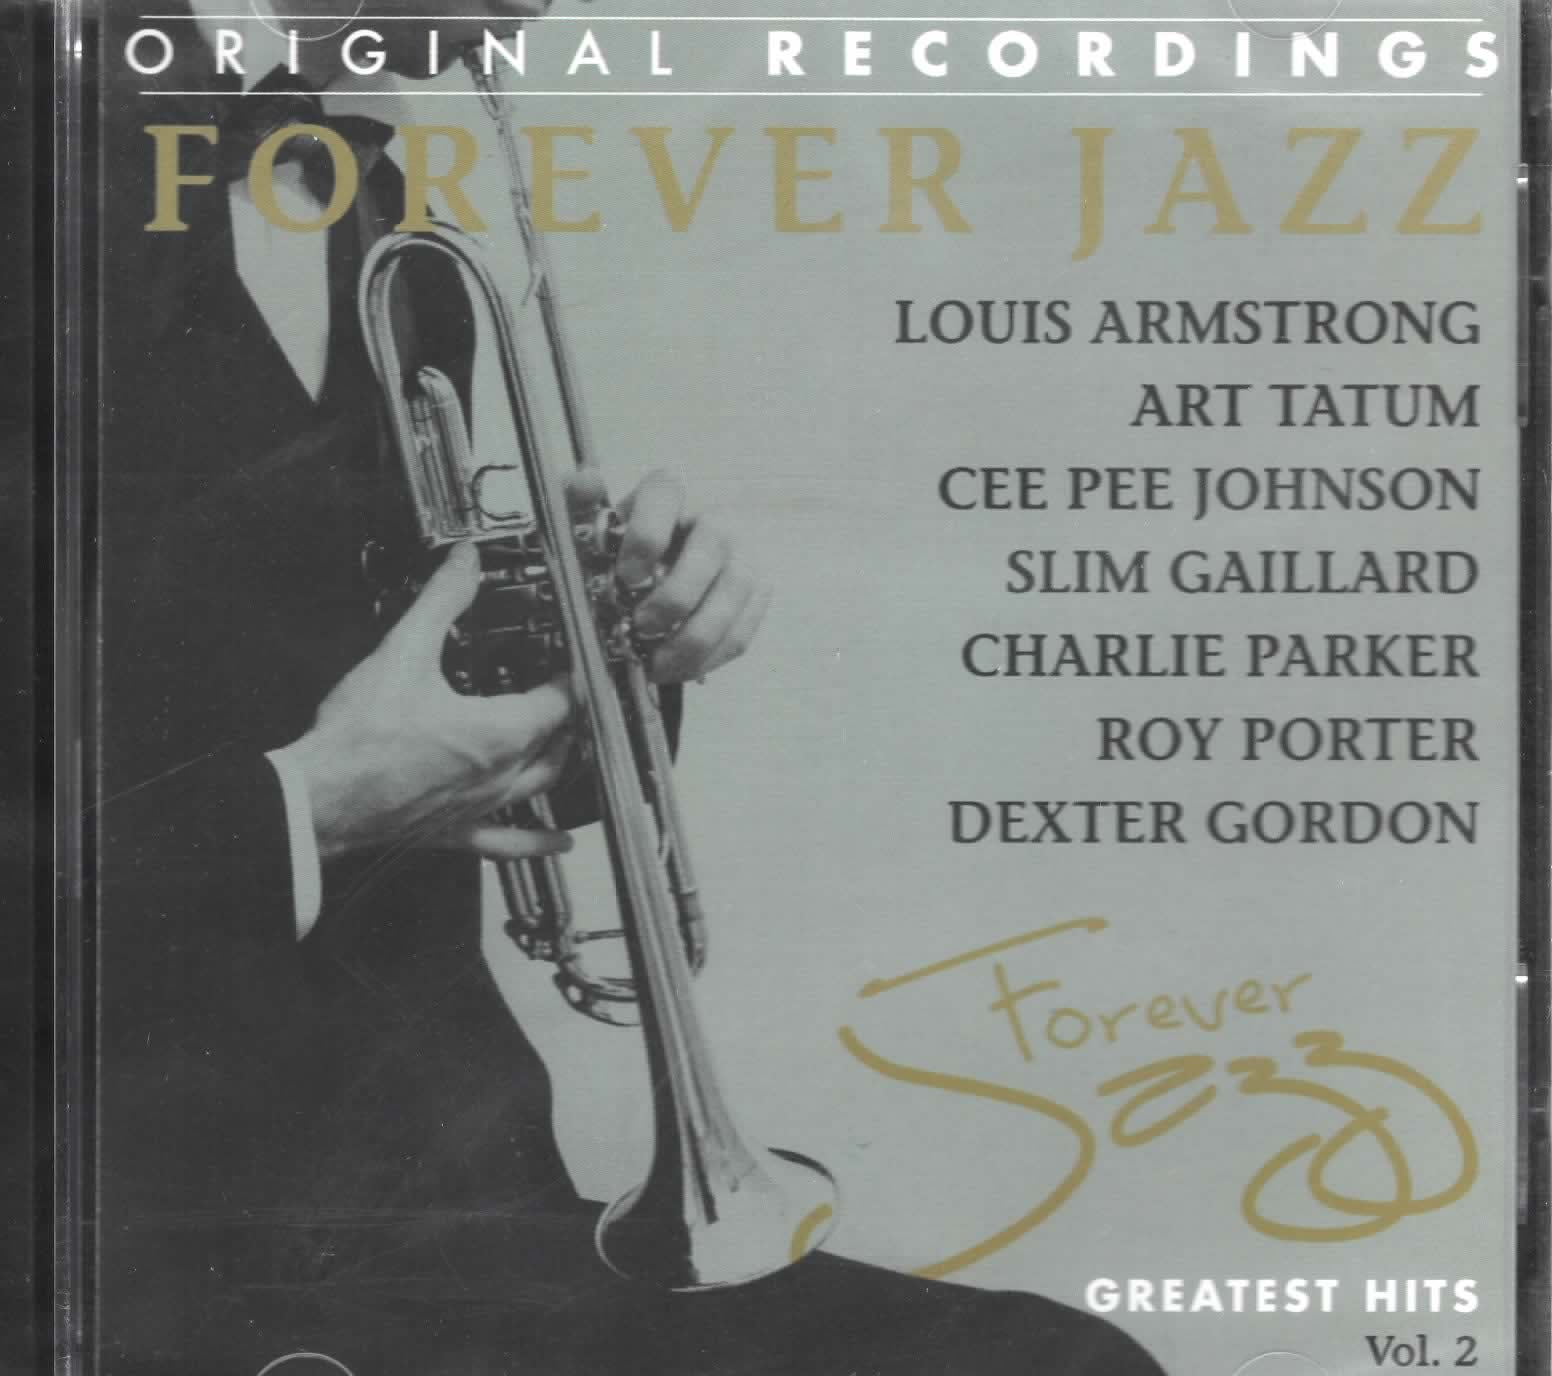 CD Forever Jazz - Greatest Hits Vol. 2